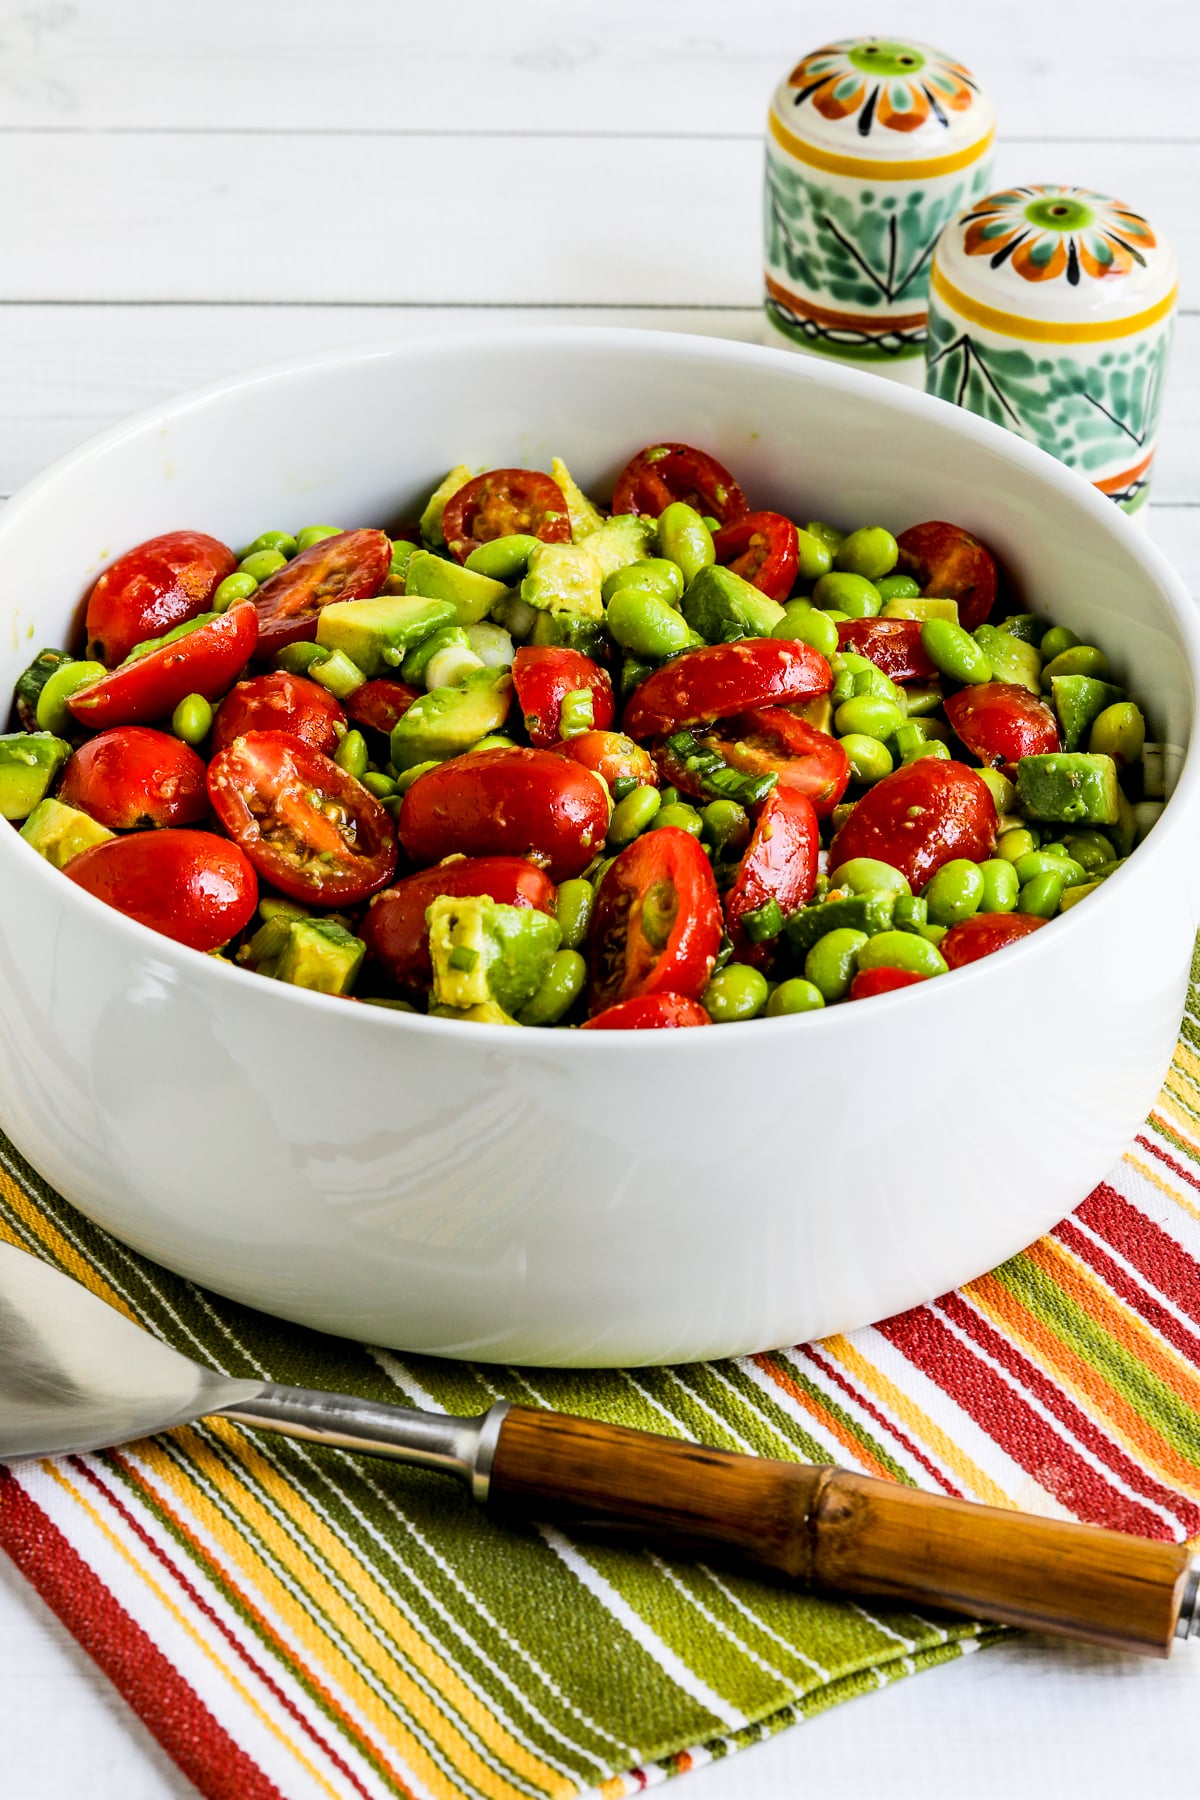 Tomato Avocado Salad with Edamame in serving bowl with striped napkin, serving fork, and Mexican salt-pepper shakers.